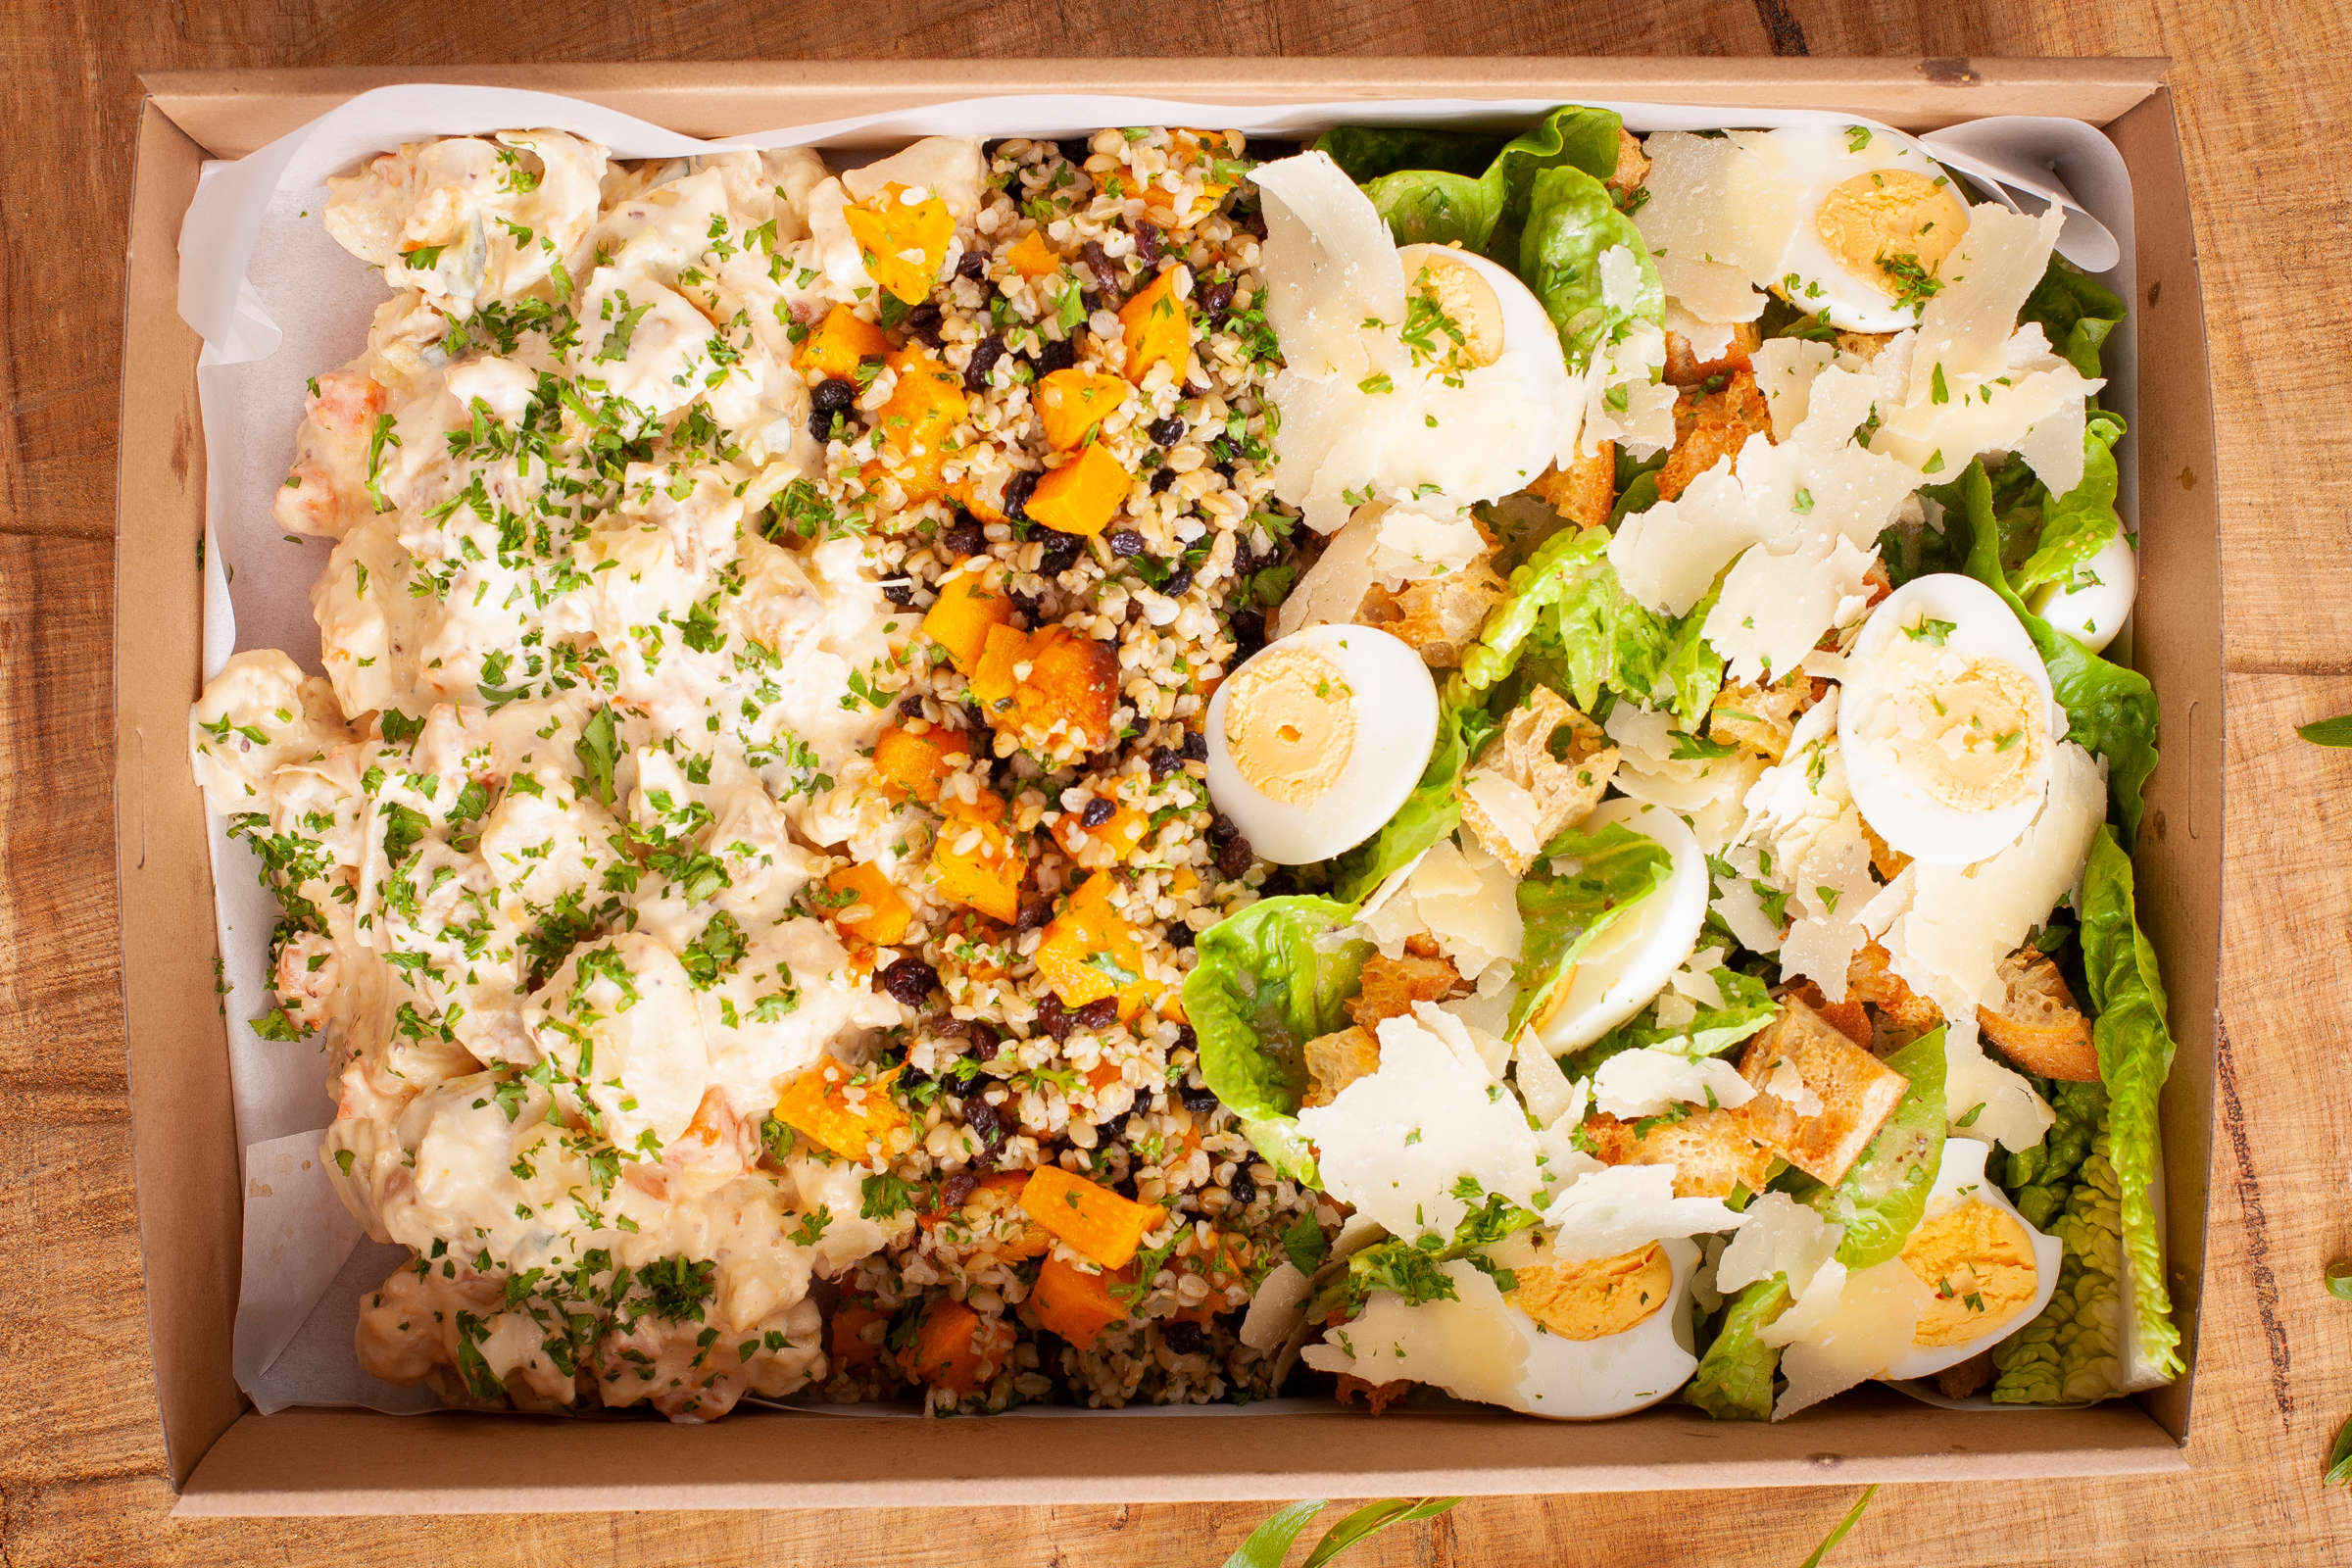 Mixed salad catering box. Salads included are (1) cos salad with croutons, hard boiled eggs, Caesar dressing, and parmesan; (2) roast pumpkin, currant, fresh herbs and freekeh; (3) potato salad with a mustard mayonnaise dressing. Credit: Richard Jupe.